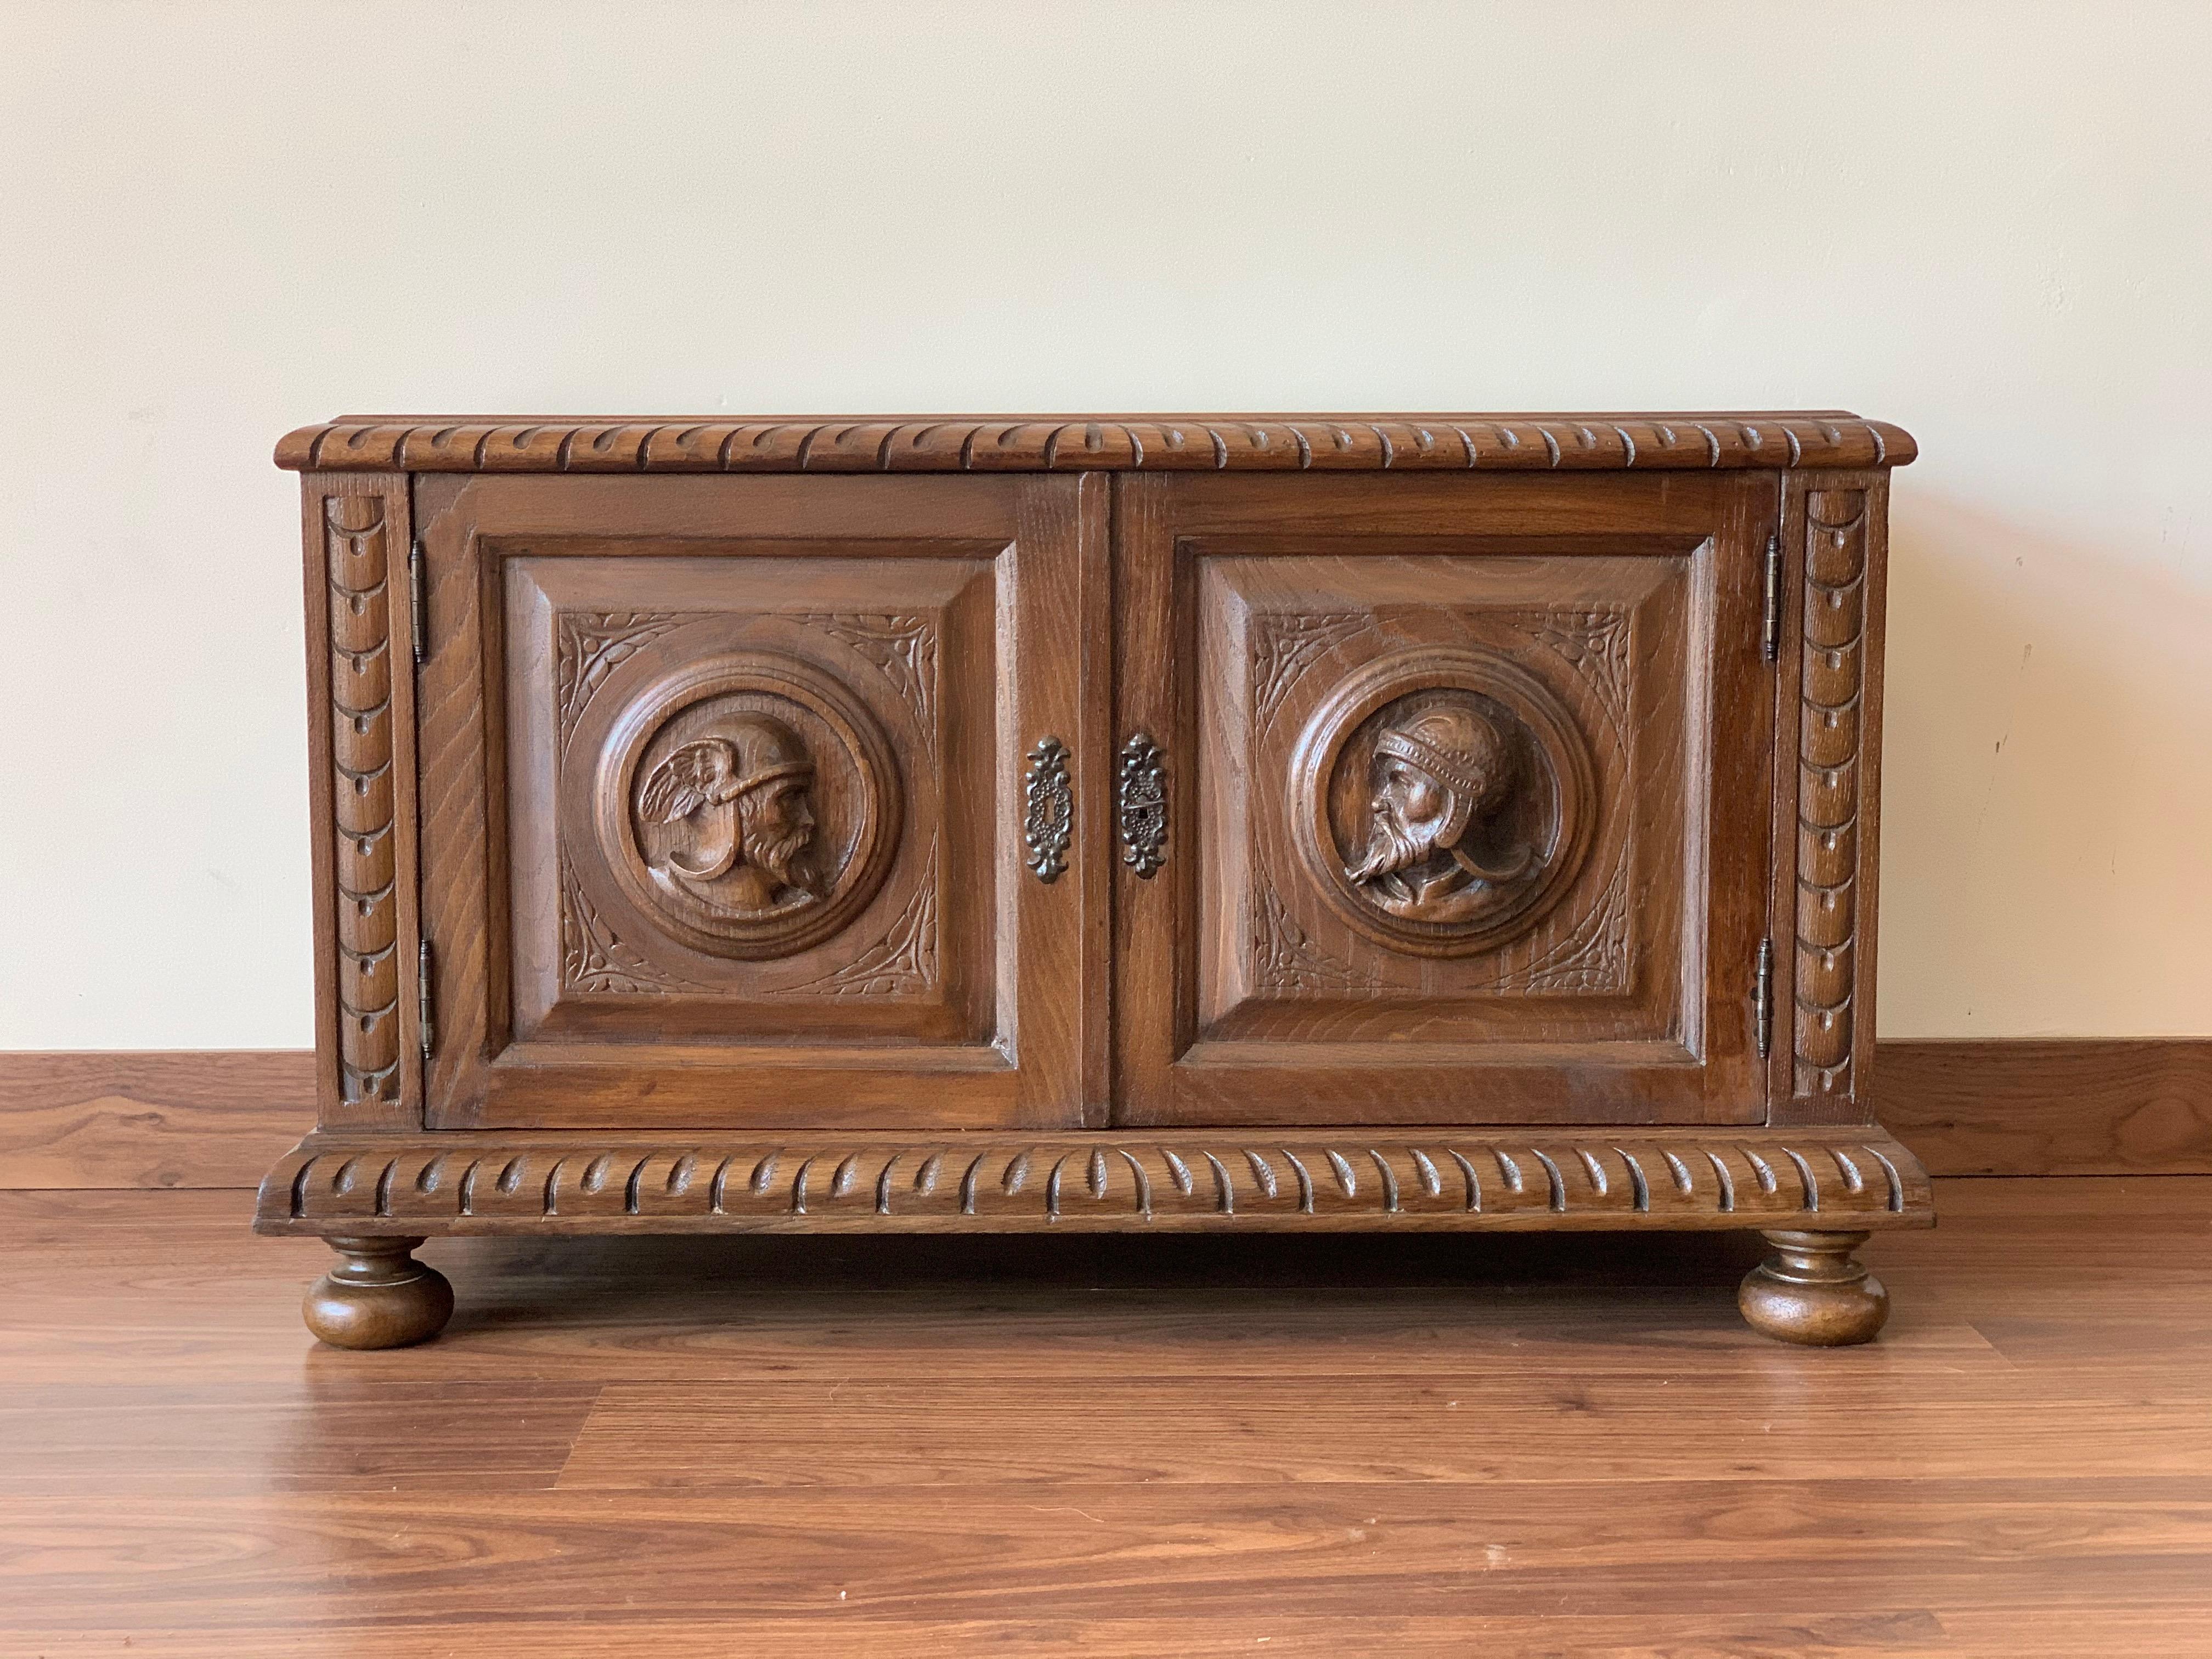 Nice 19th century chest in brown chestnut. Hand carved facade panel with heads decorations. Plinth with brace decorations, dovetail assembly with wrought iron wardware.
Add a real show stopper to your interior with this extremely Spanish chest or